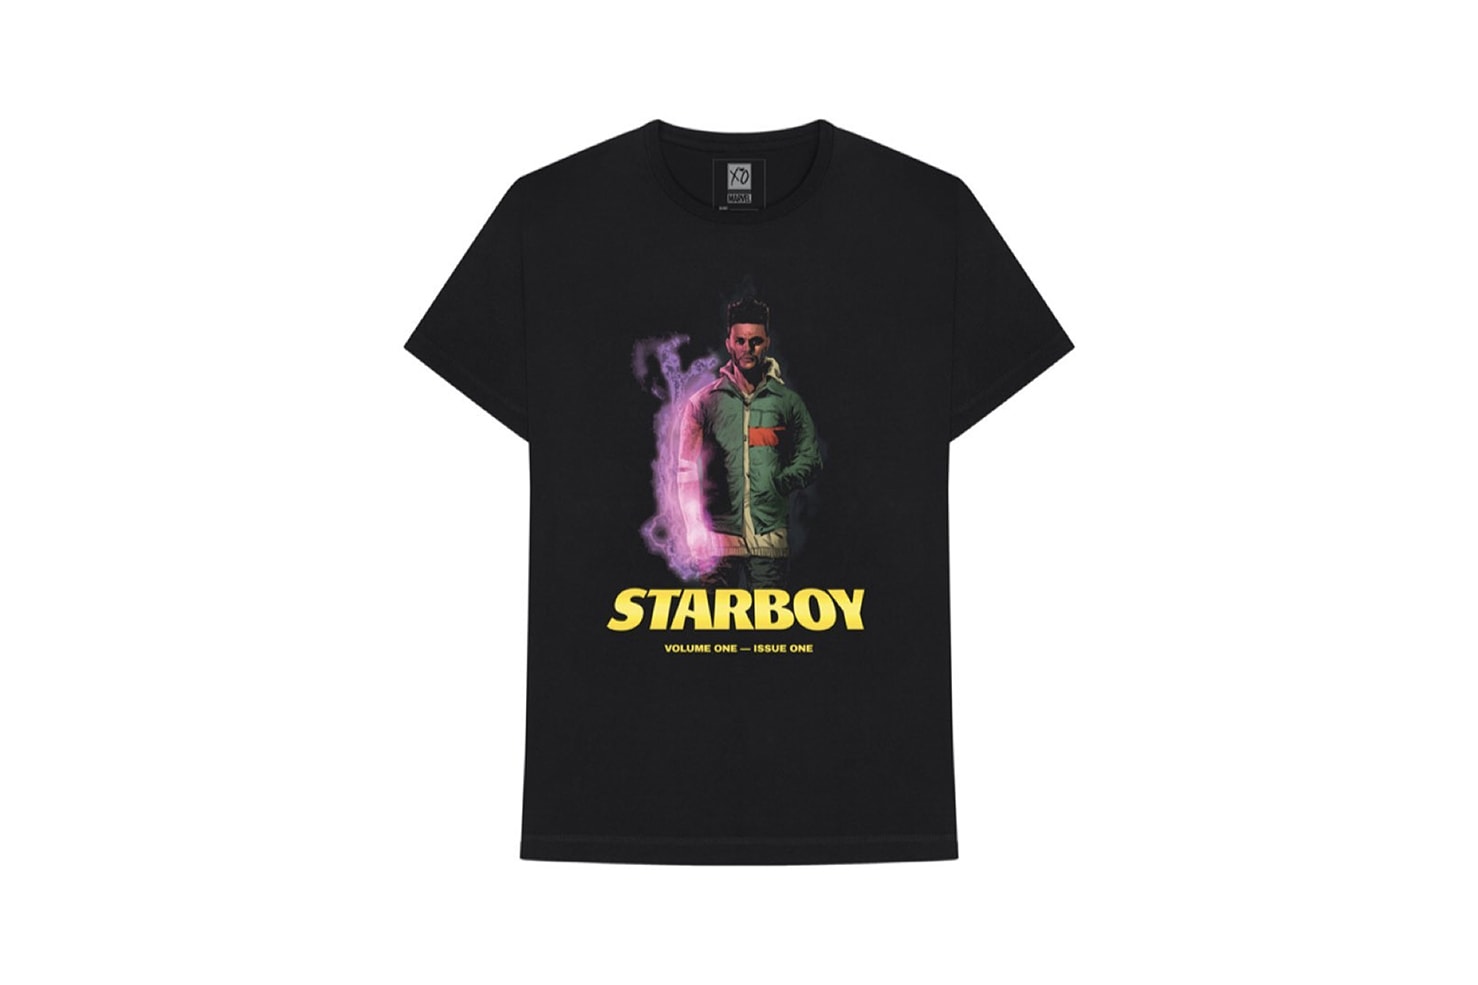 The Weeknd Marvel Comic Collection Collab T-Shirts Hoodies Jackets Caps Marvel XO Release Date Availability Pricing May 18